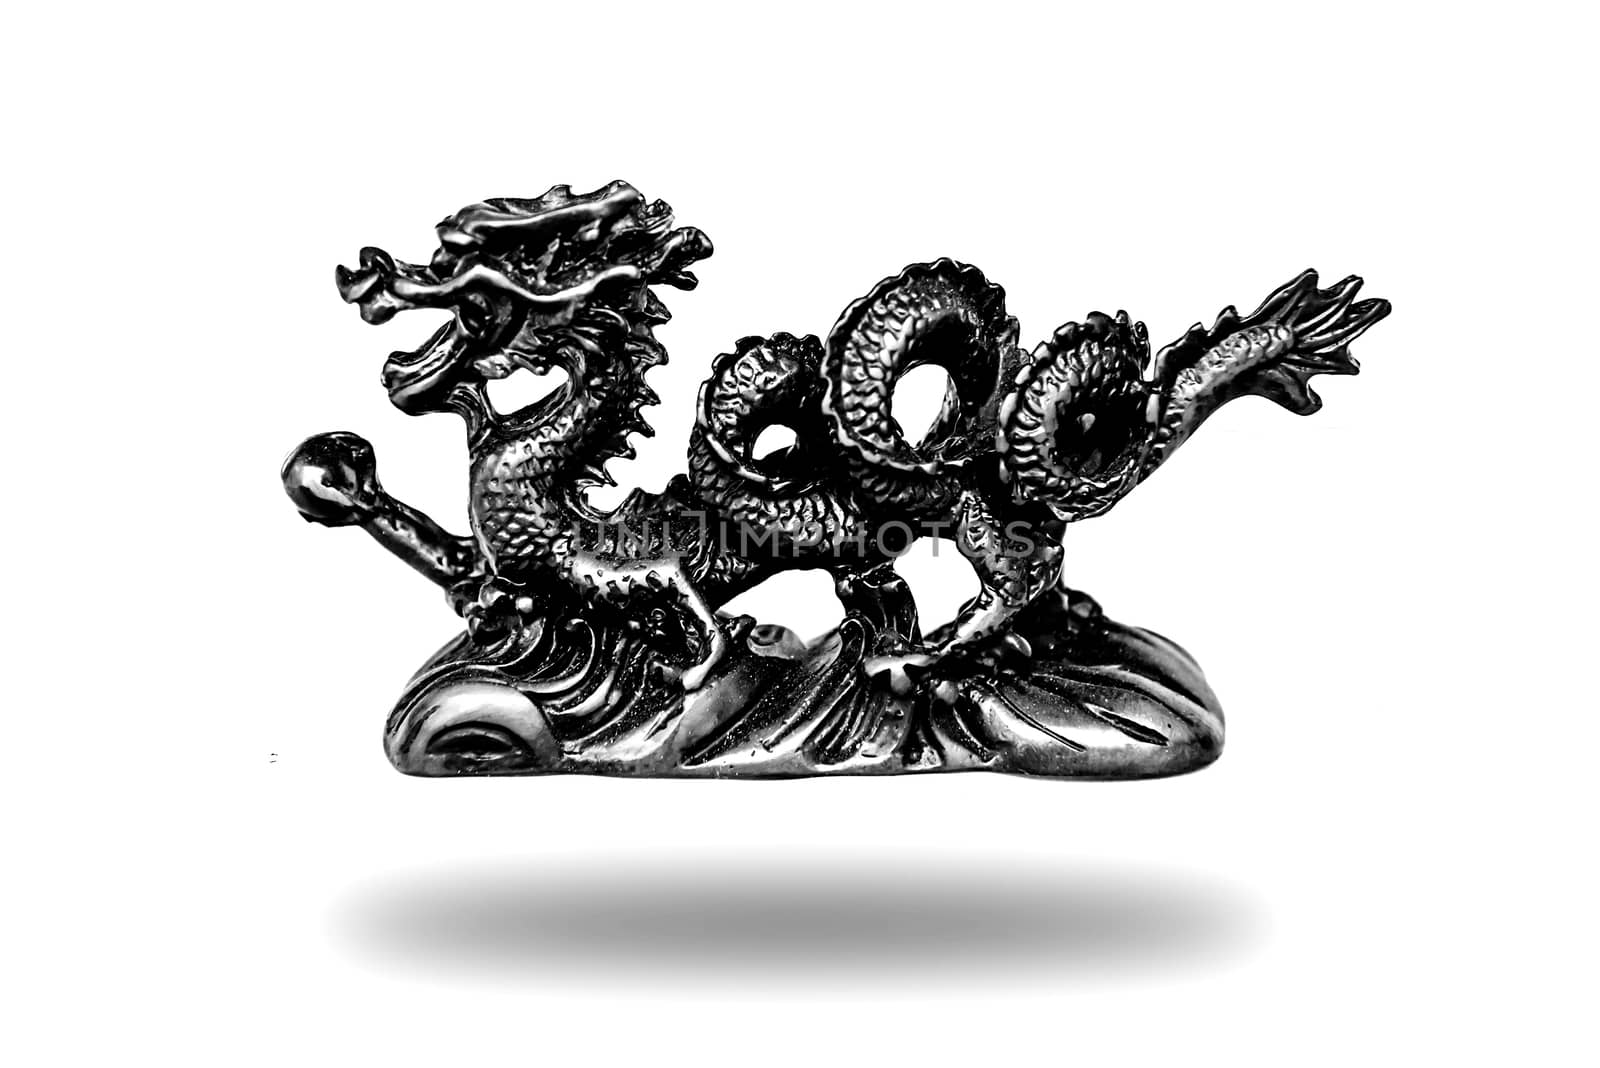 Chinese Guardian Dragon Figurines Black &amp; White color Statues